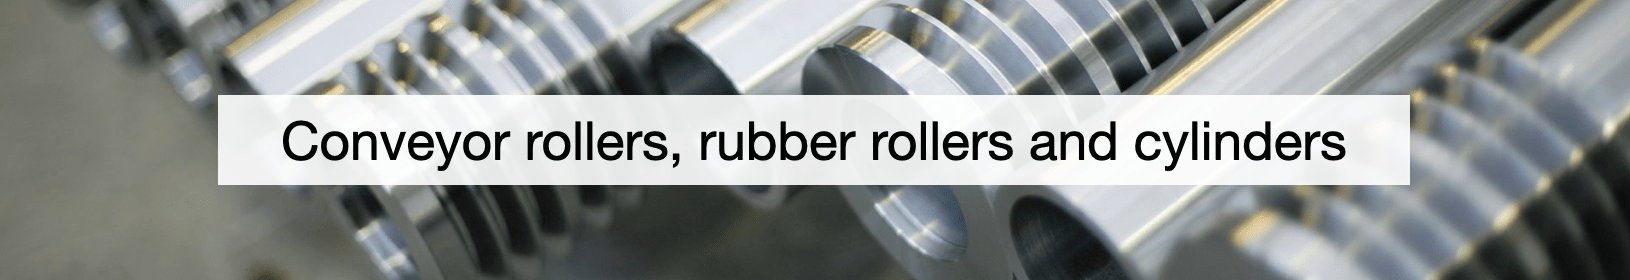 conveyor rollers, rubber rollers and cylinders